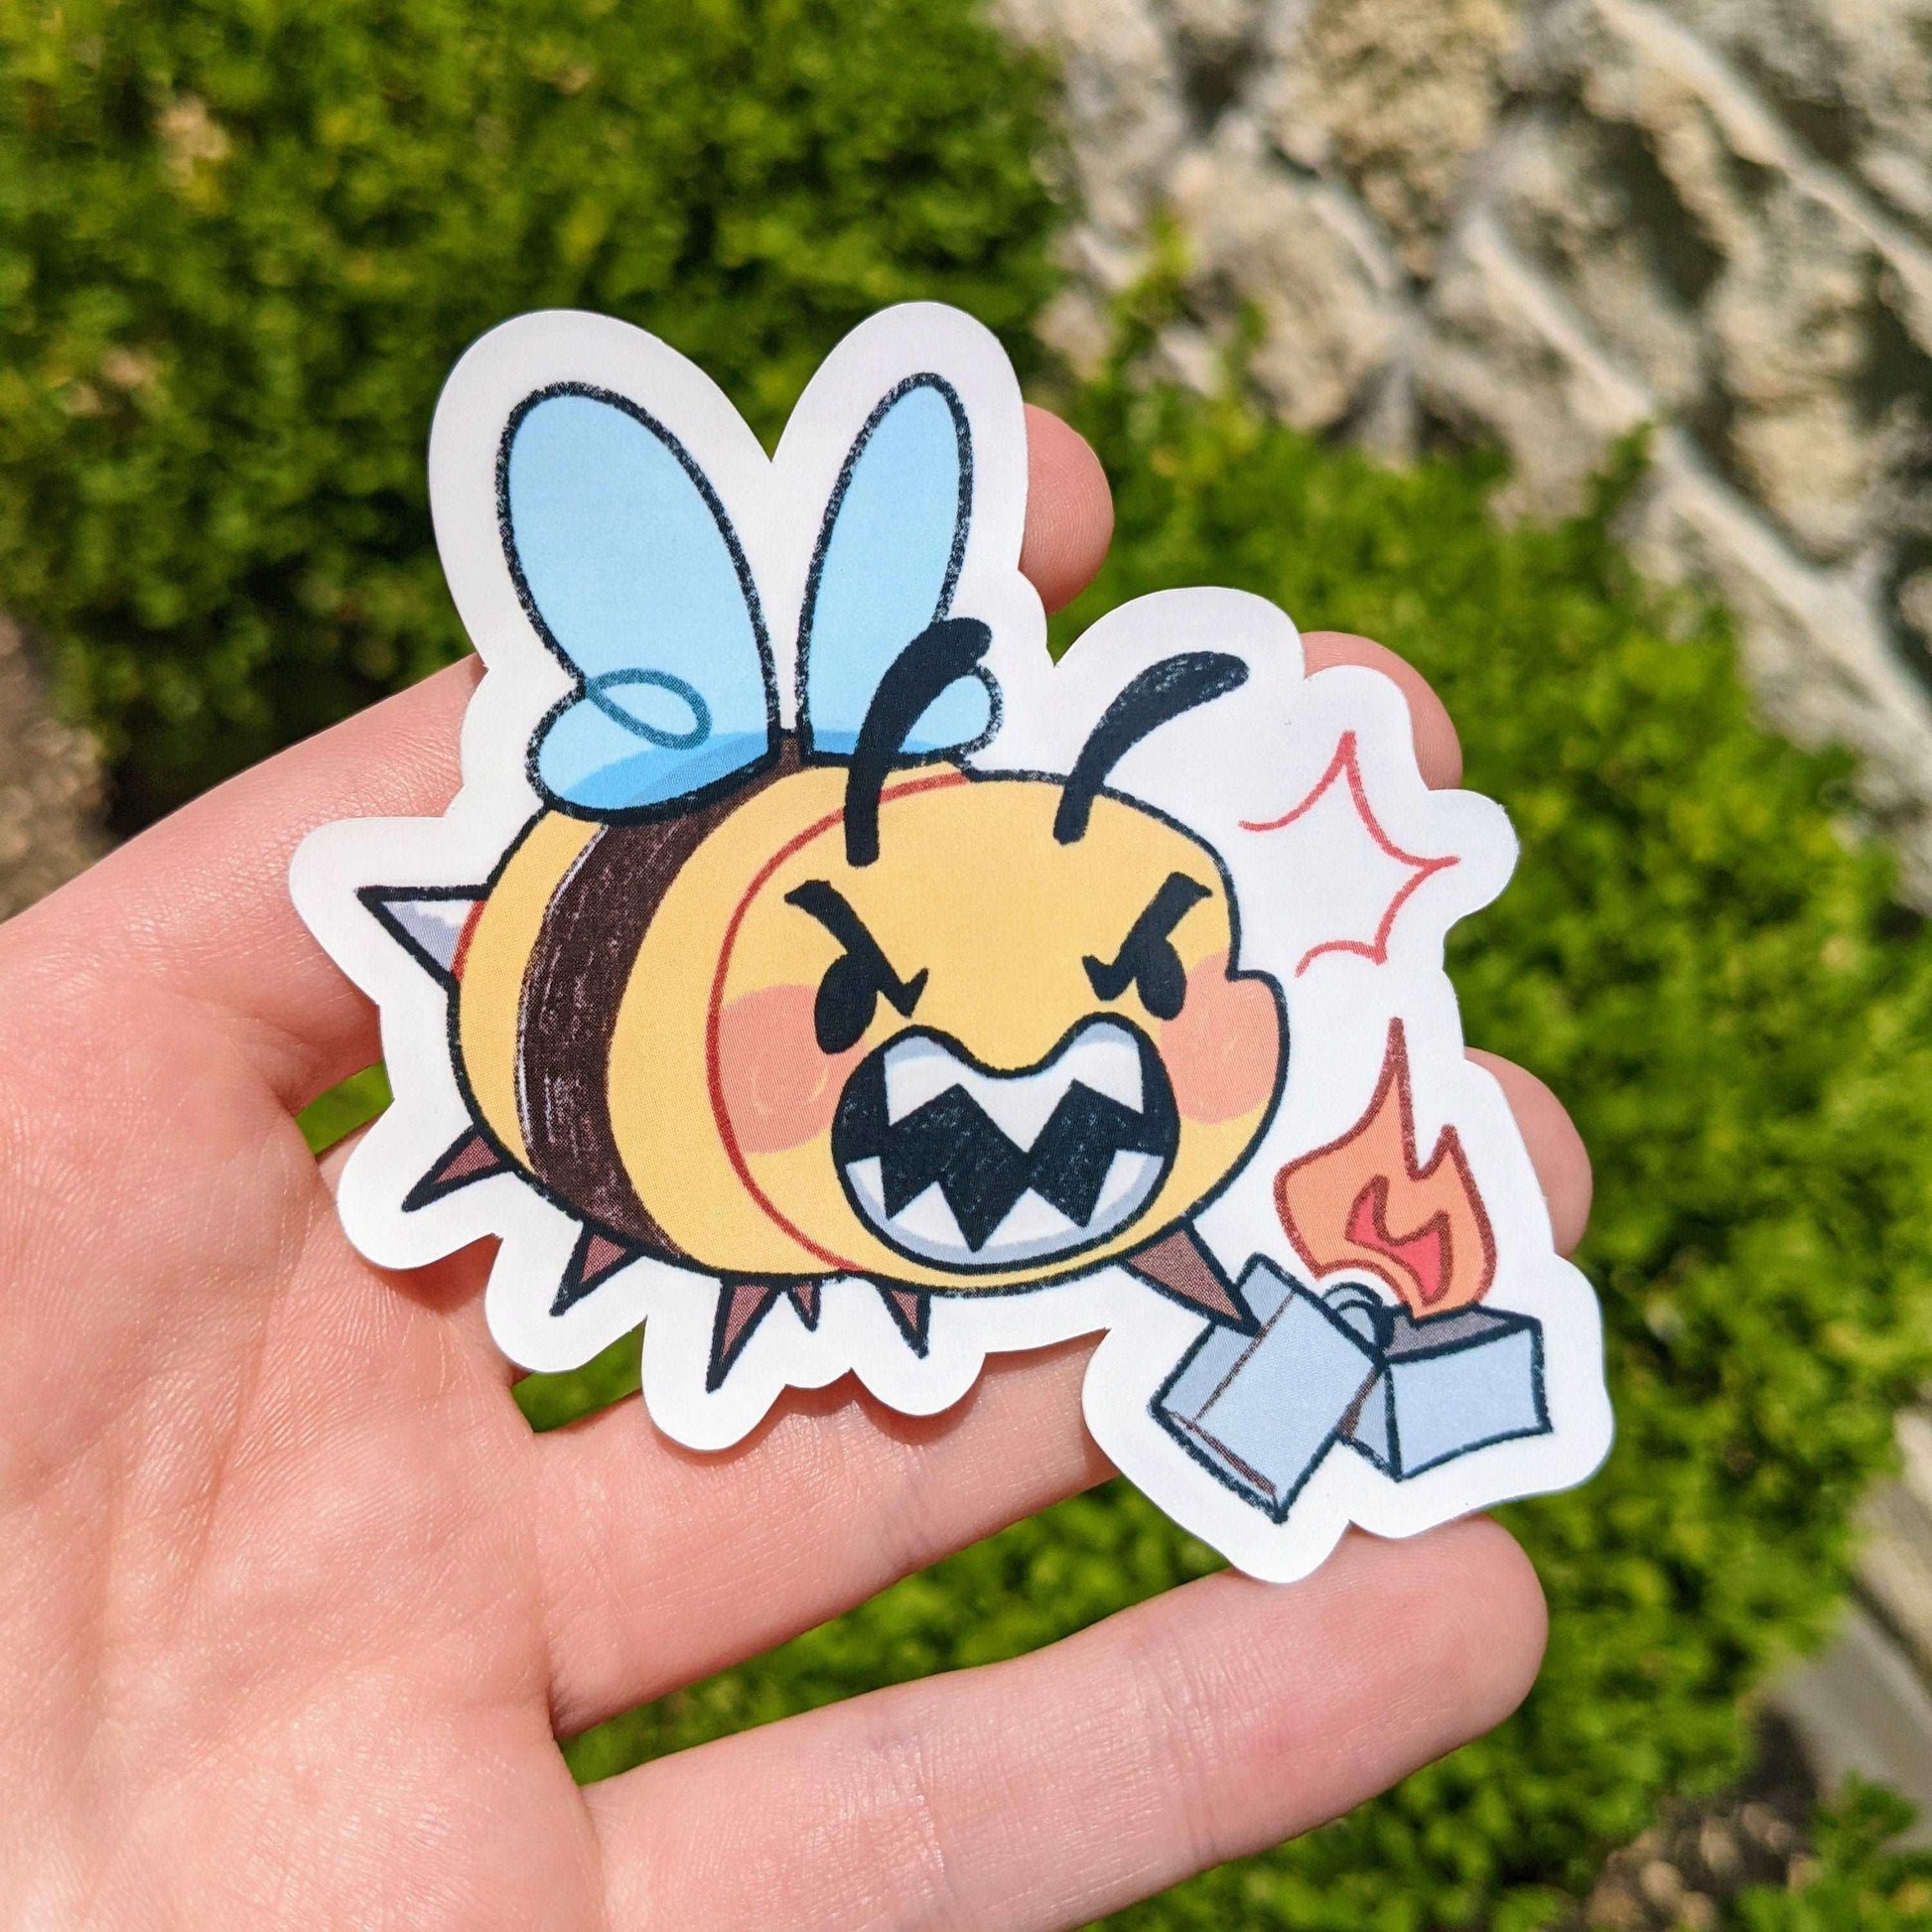 Chaotic Bees Stickers!